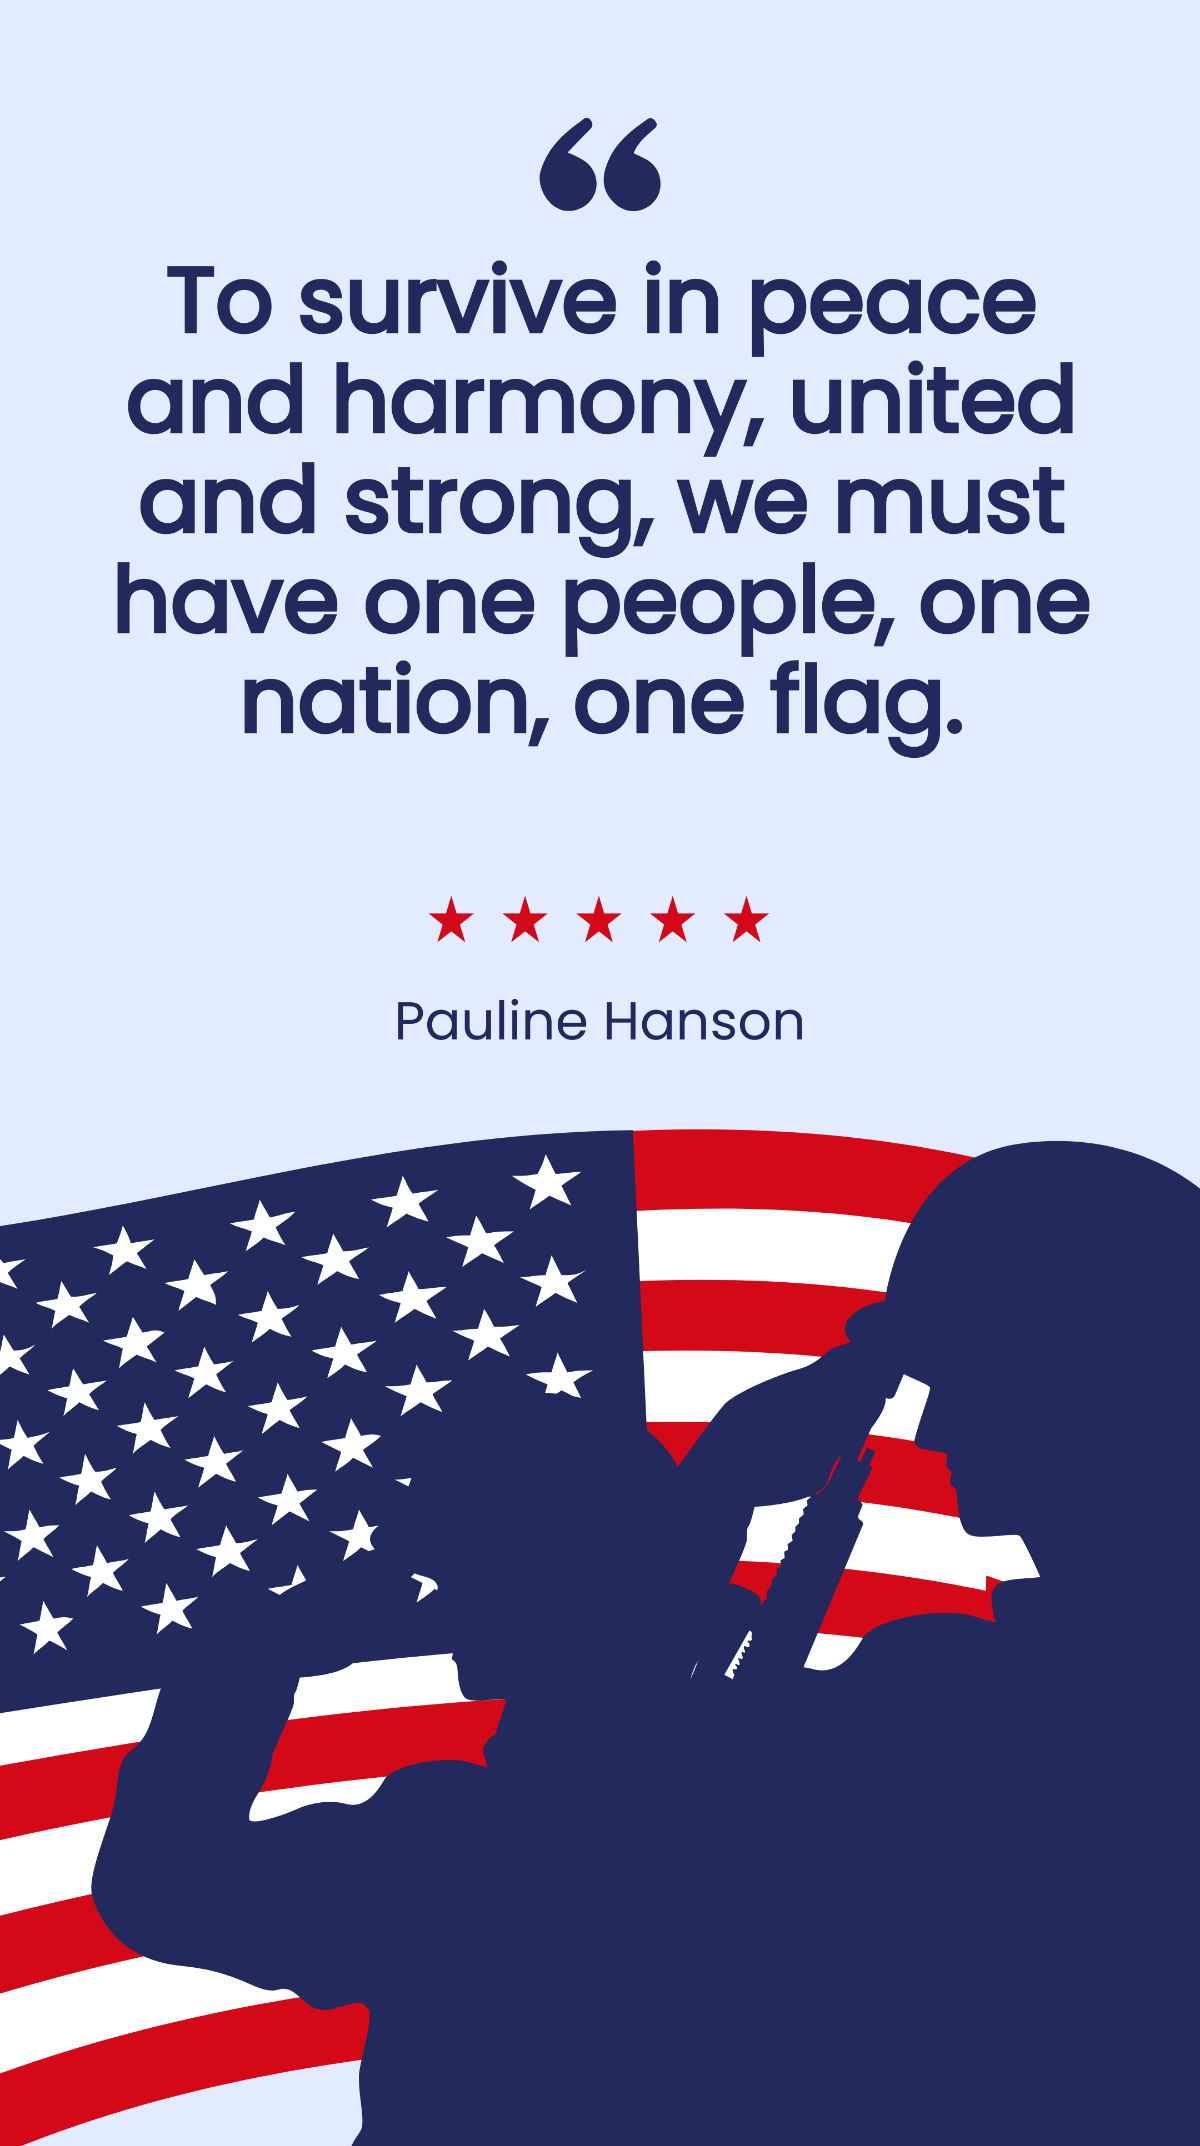 Pauline Hanson - To survive in peace and harmony, united and strong, we must have one people, one nation, one flag.